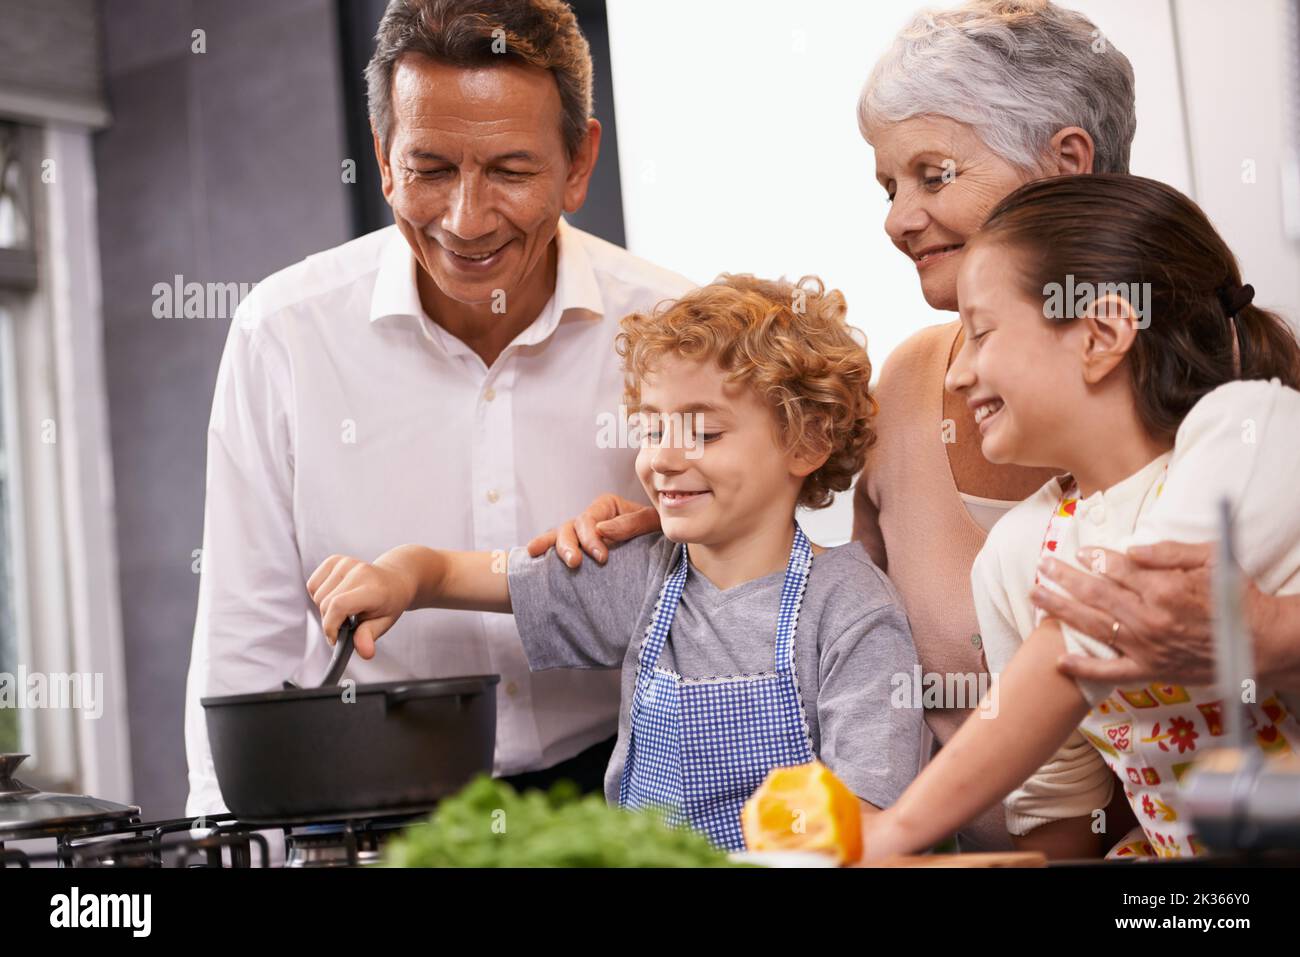 Passing down family recipe secrets. A brother and sister helping to make dinner at their grandparents house. Stock Photo